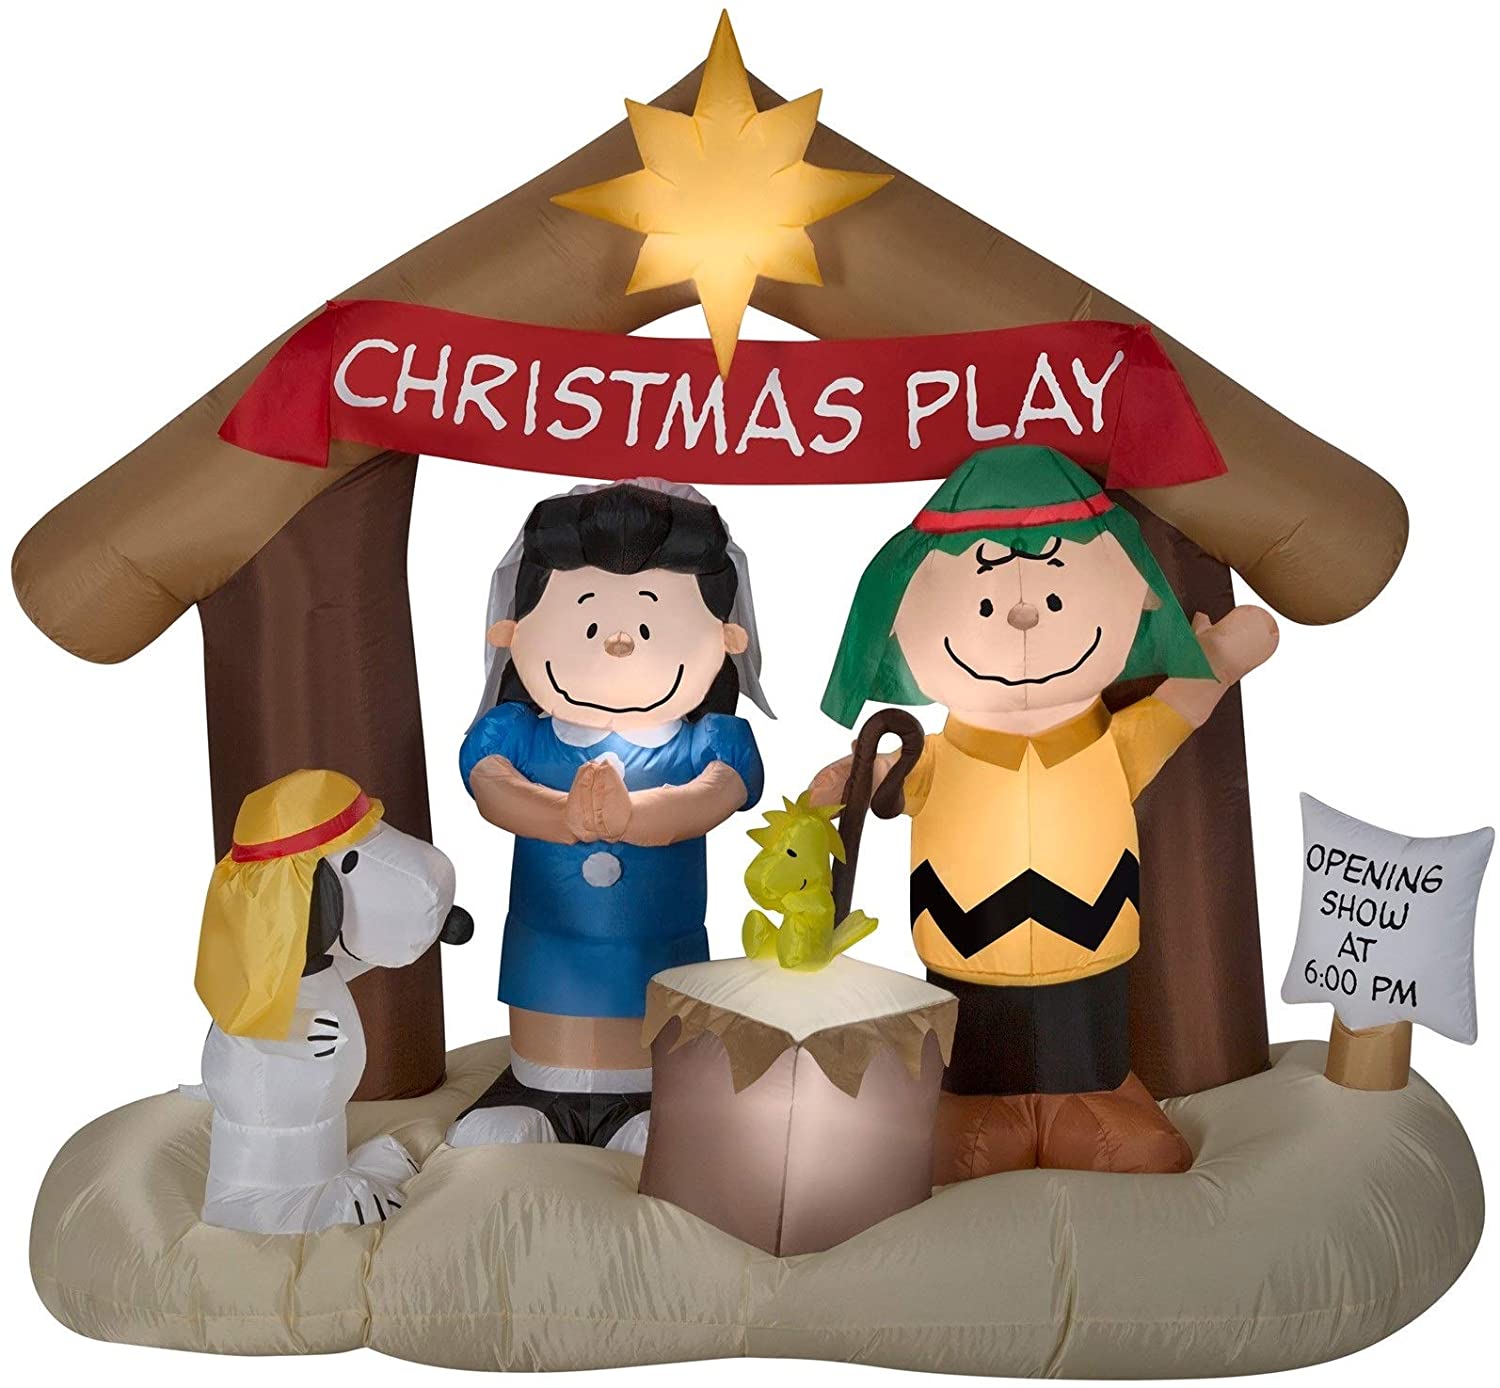 Holiday 6 ft Peanuts Nativity Airblown Inflatable Christmas Play Charlie Brown Lucy Snoopy Woodstock